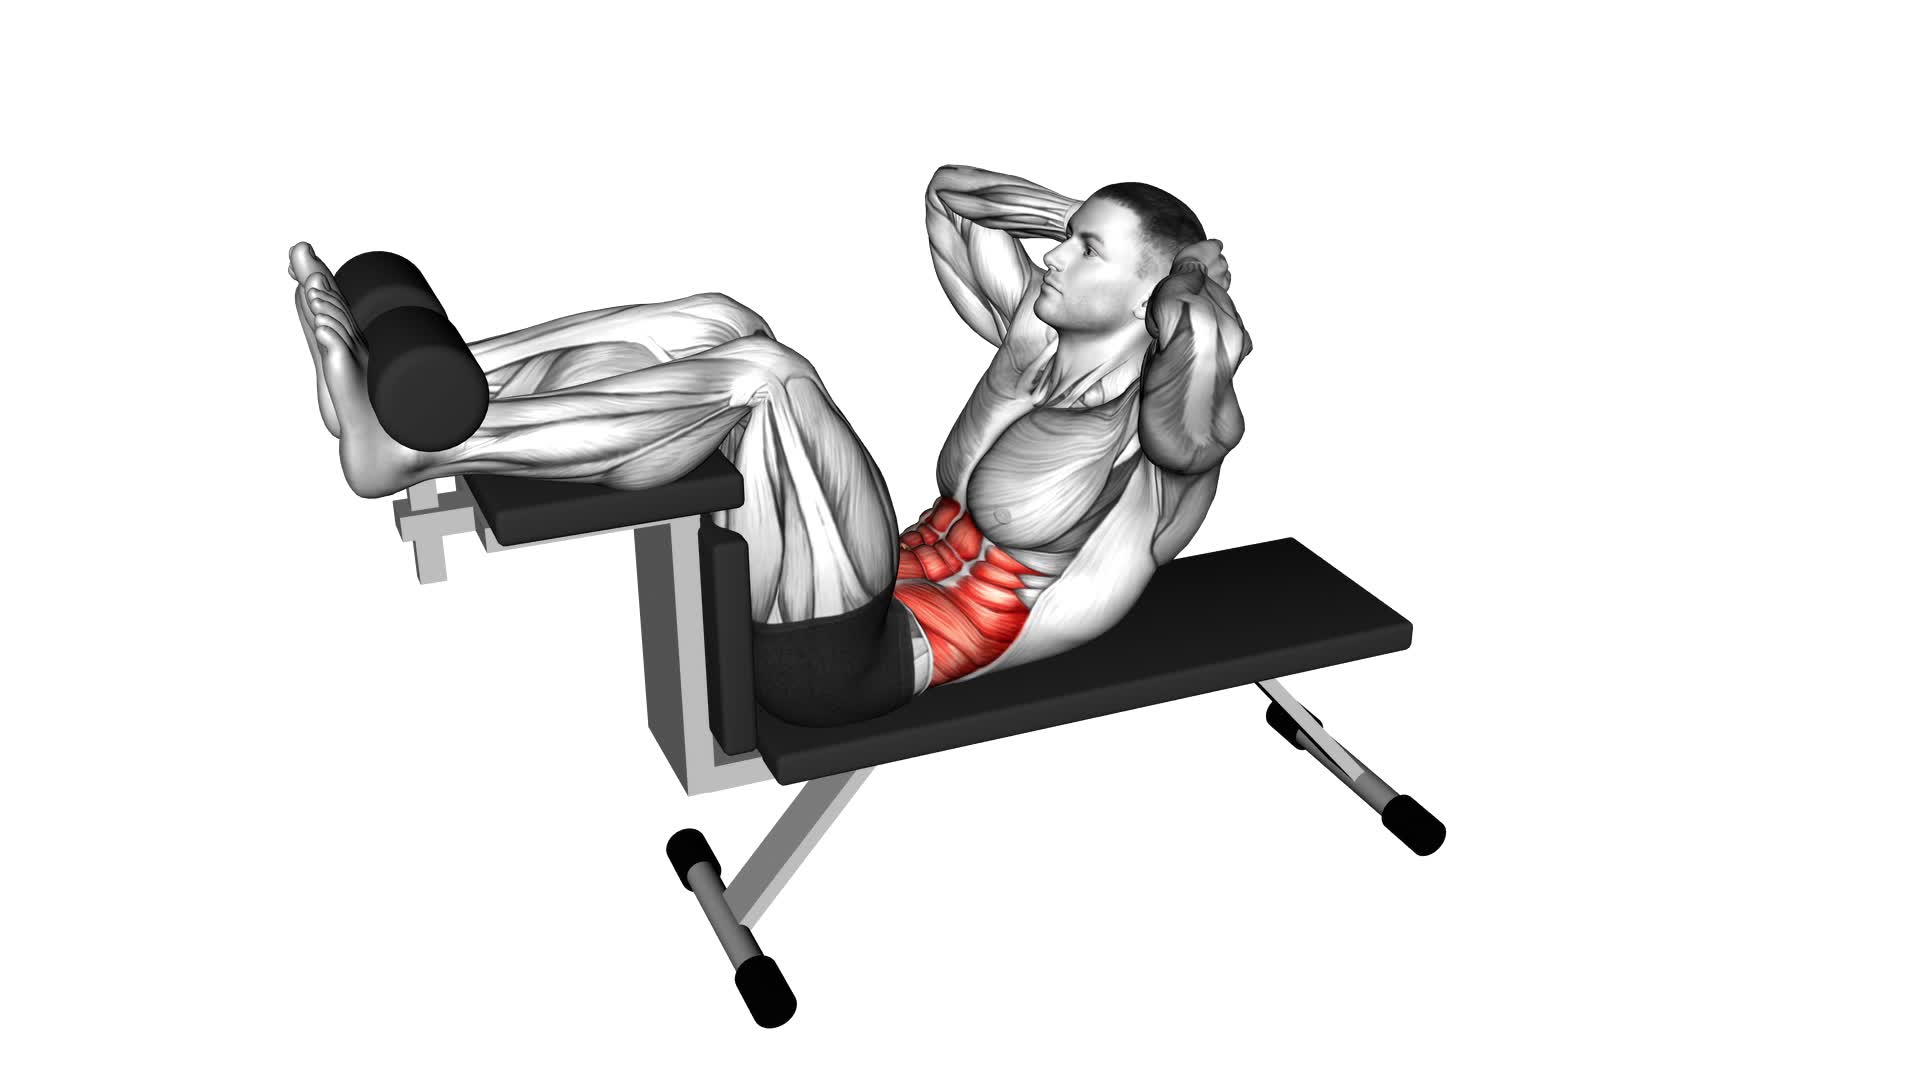 Crunch (On Bench) (Male) - Video Exercise Guide & Tips